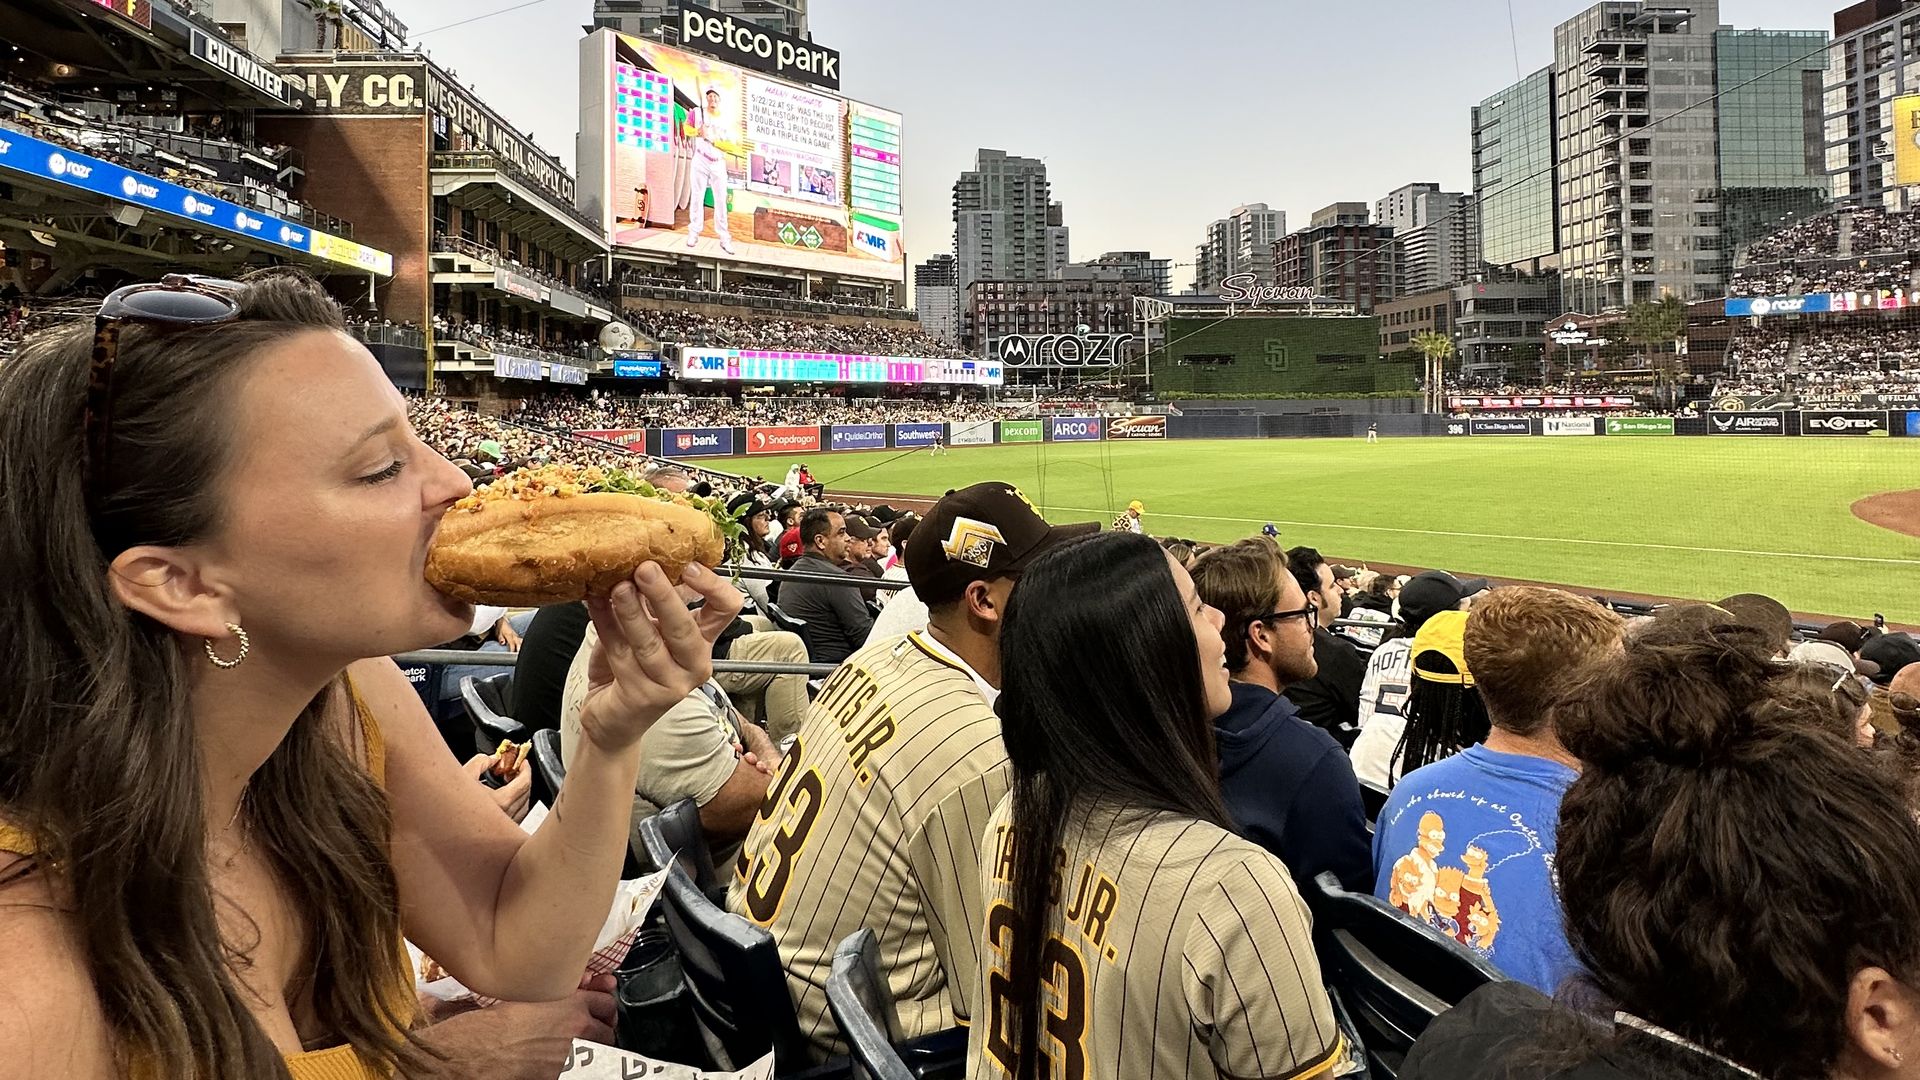 A woman sitting in the stands at a baseball game eats a hotdog.